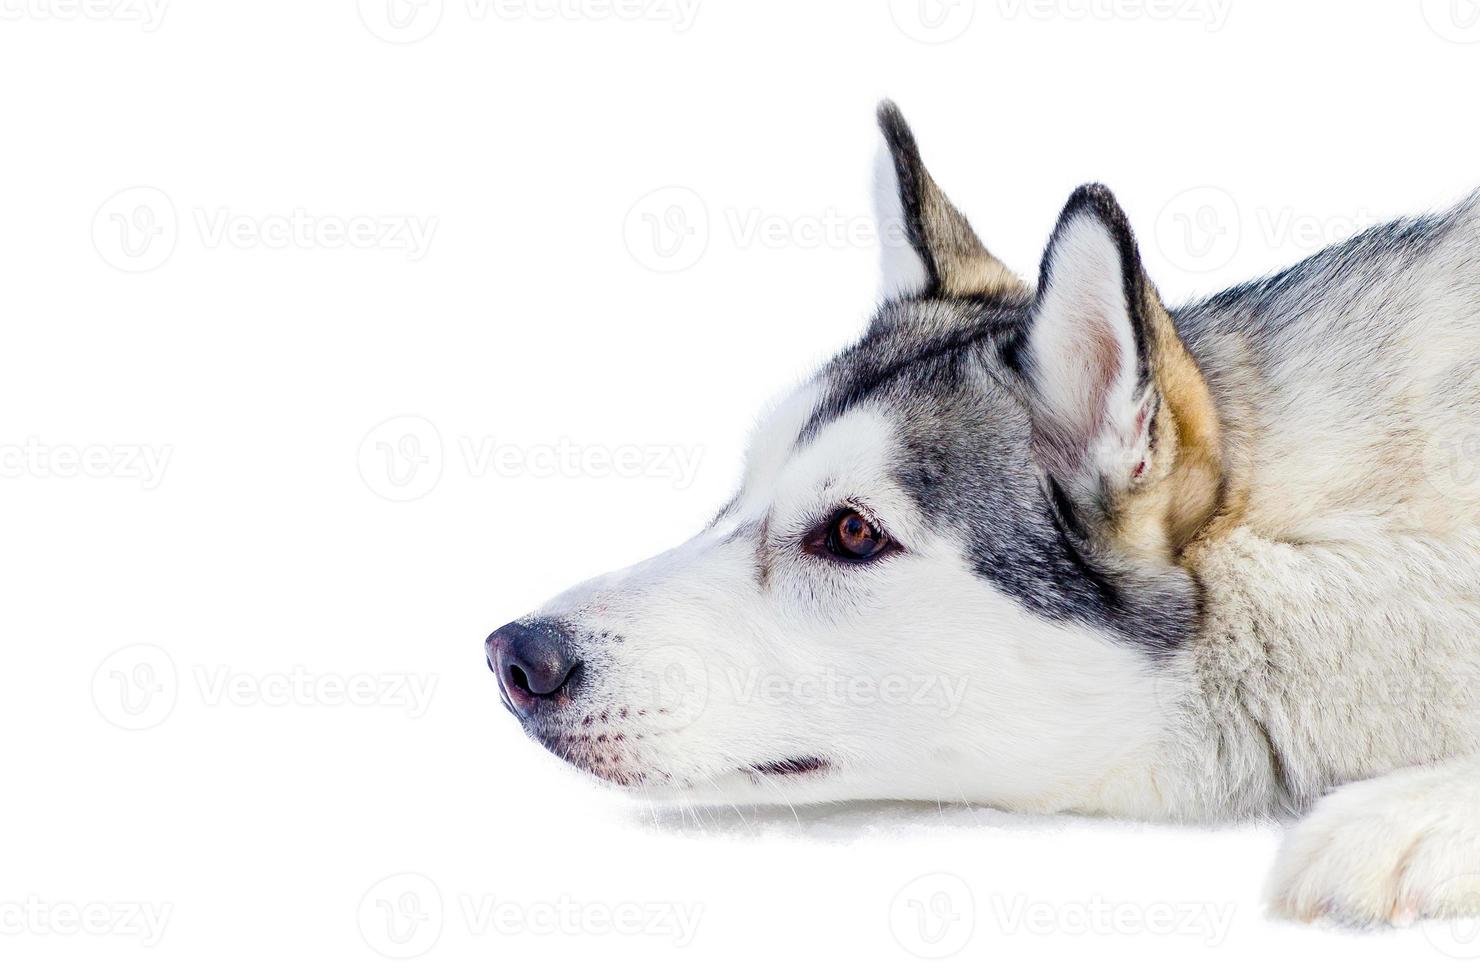 Siberian husky dog lying on snow, isolated portrait. Close up outdoor face portrait. Sled dogs race training in cold snow weather. Strong, cute and fast purebred dog for teamwork with sleigh. photo